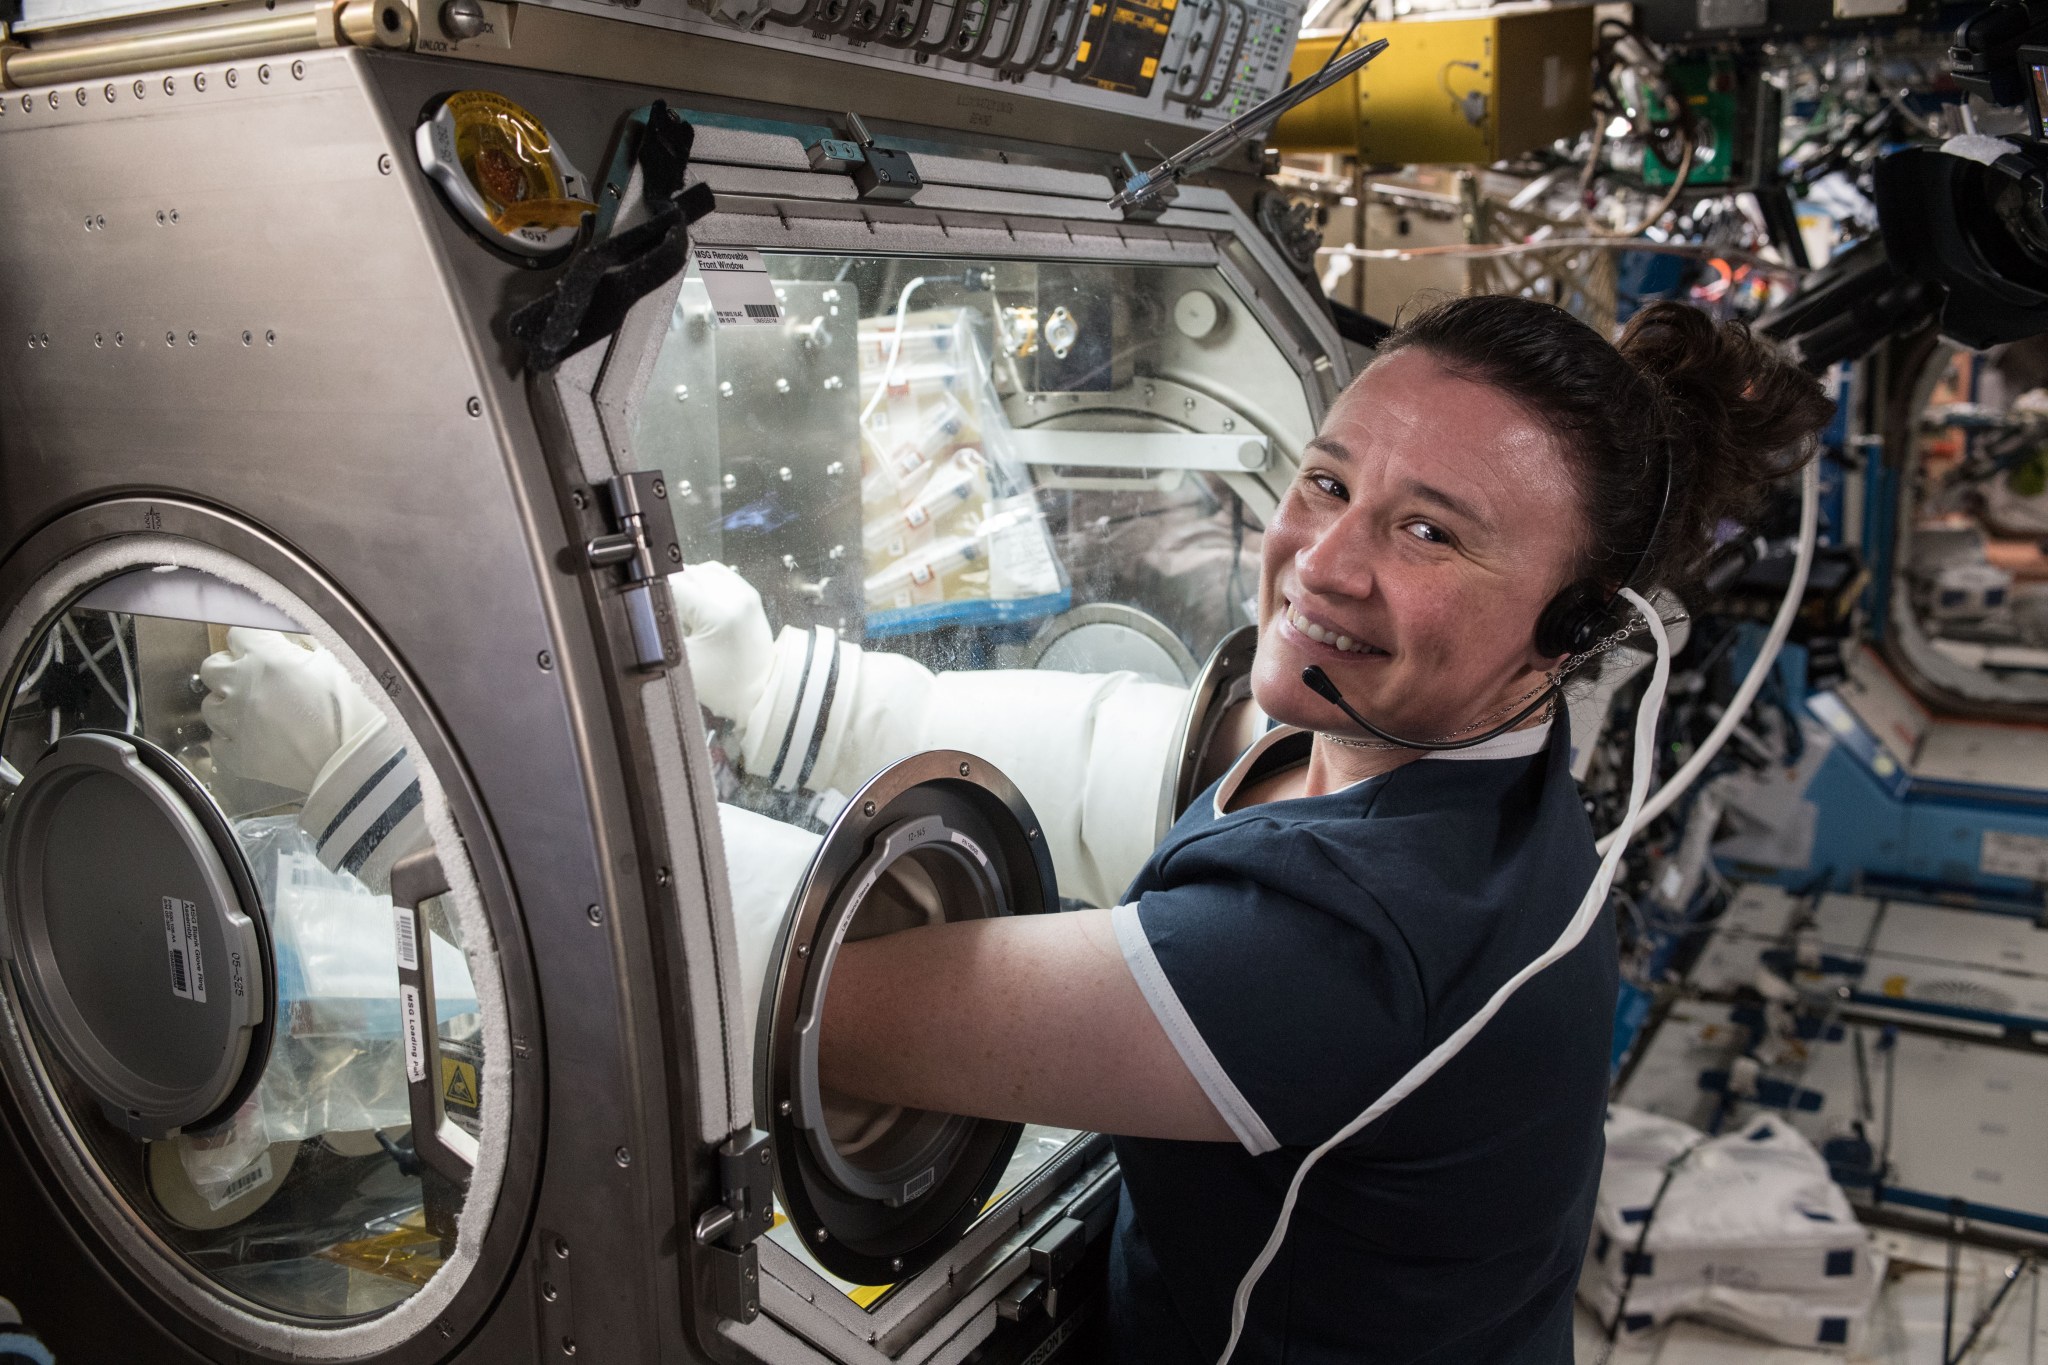 NASA Astronaut Serena Aunon-Chancellor conducts research aboard the International Space Station